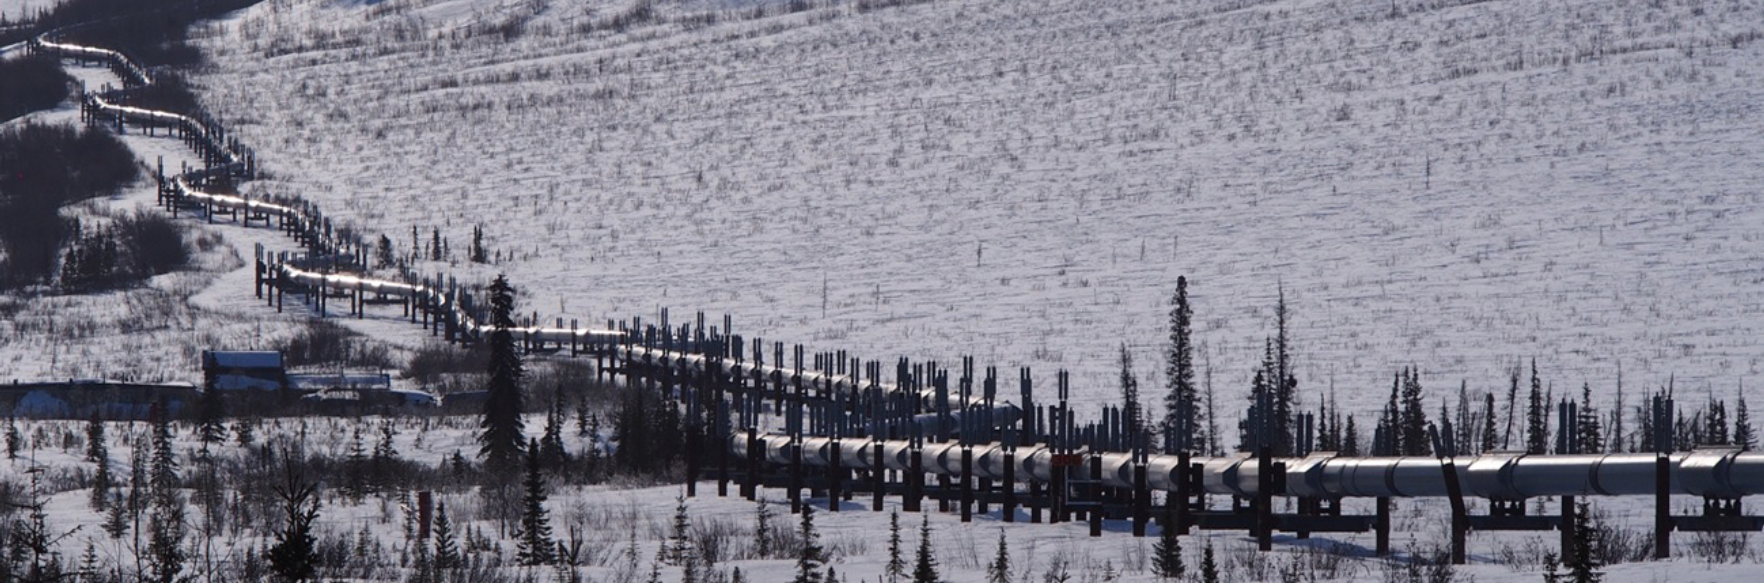 Figure 1: The Trans-Alaska Pipeline snakes across the tundra, just south of the Arctic Circle, March 2019. Source: Philip Wight.